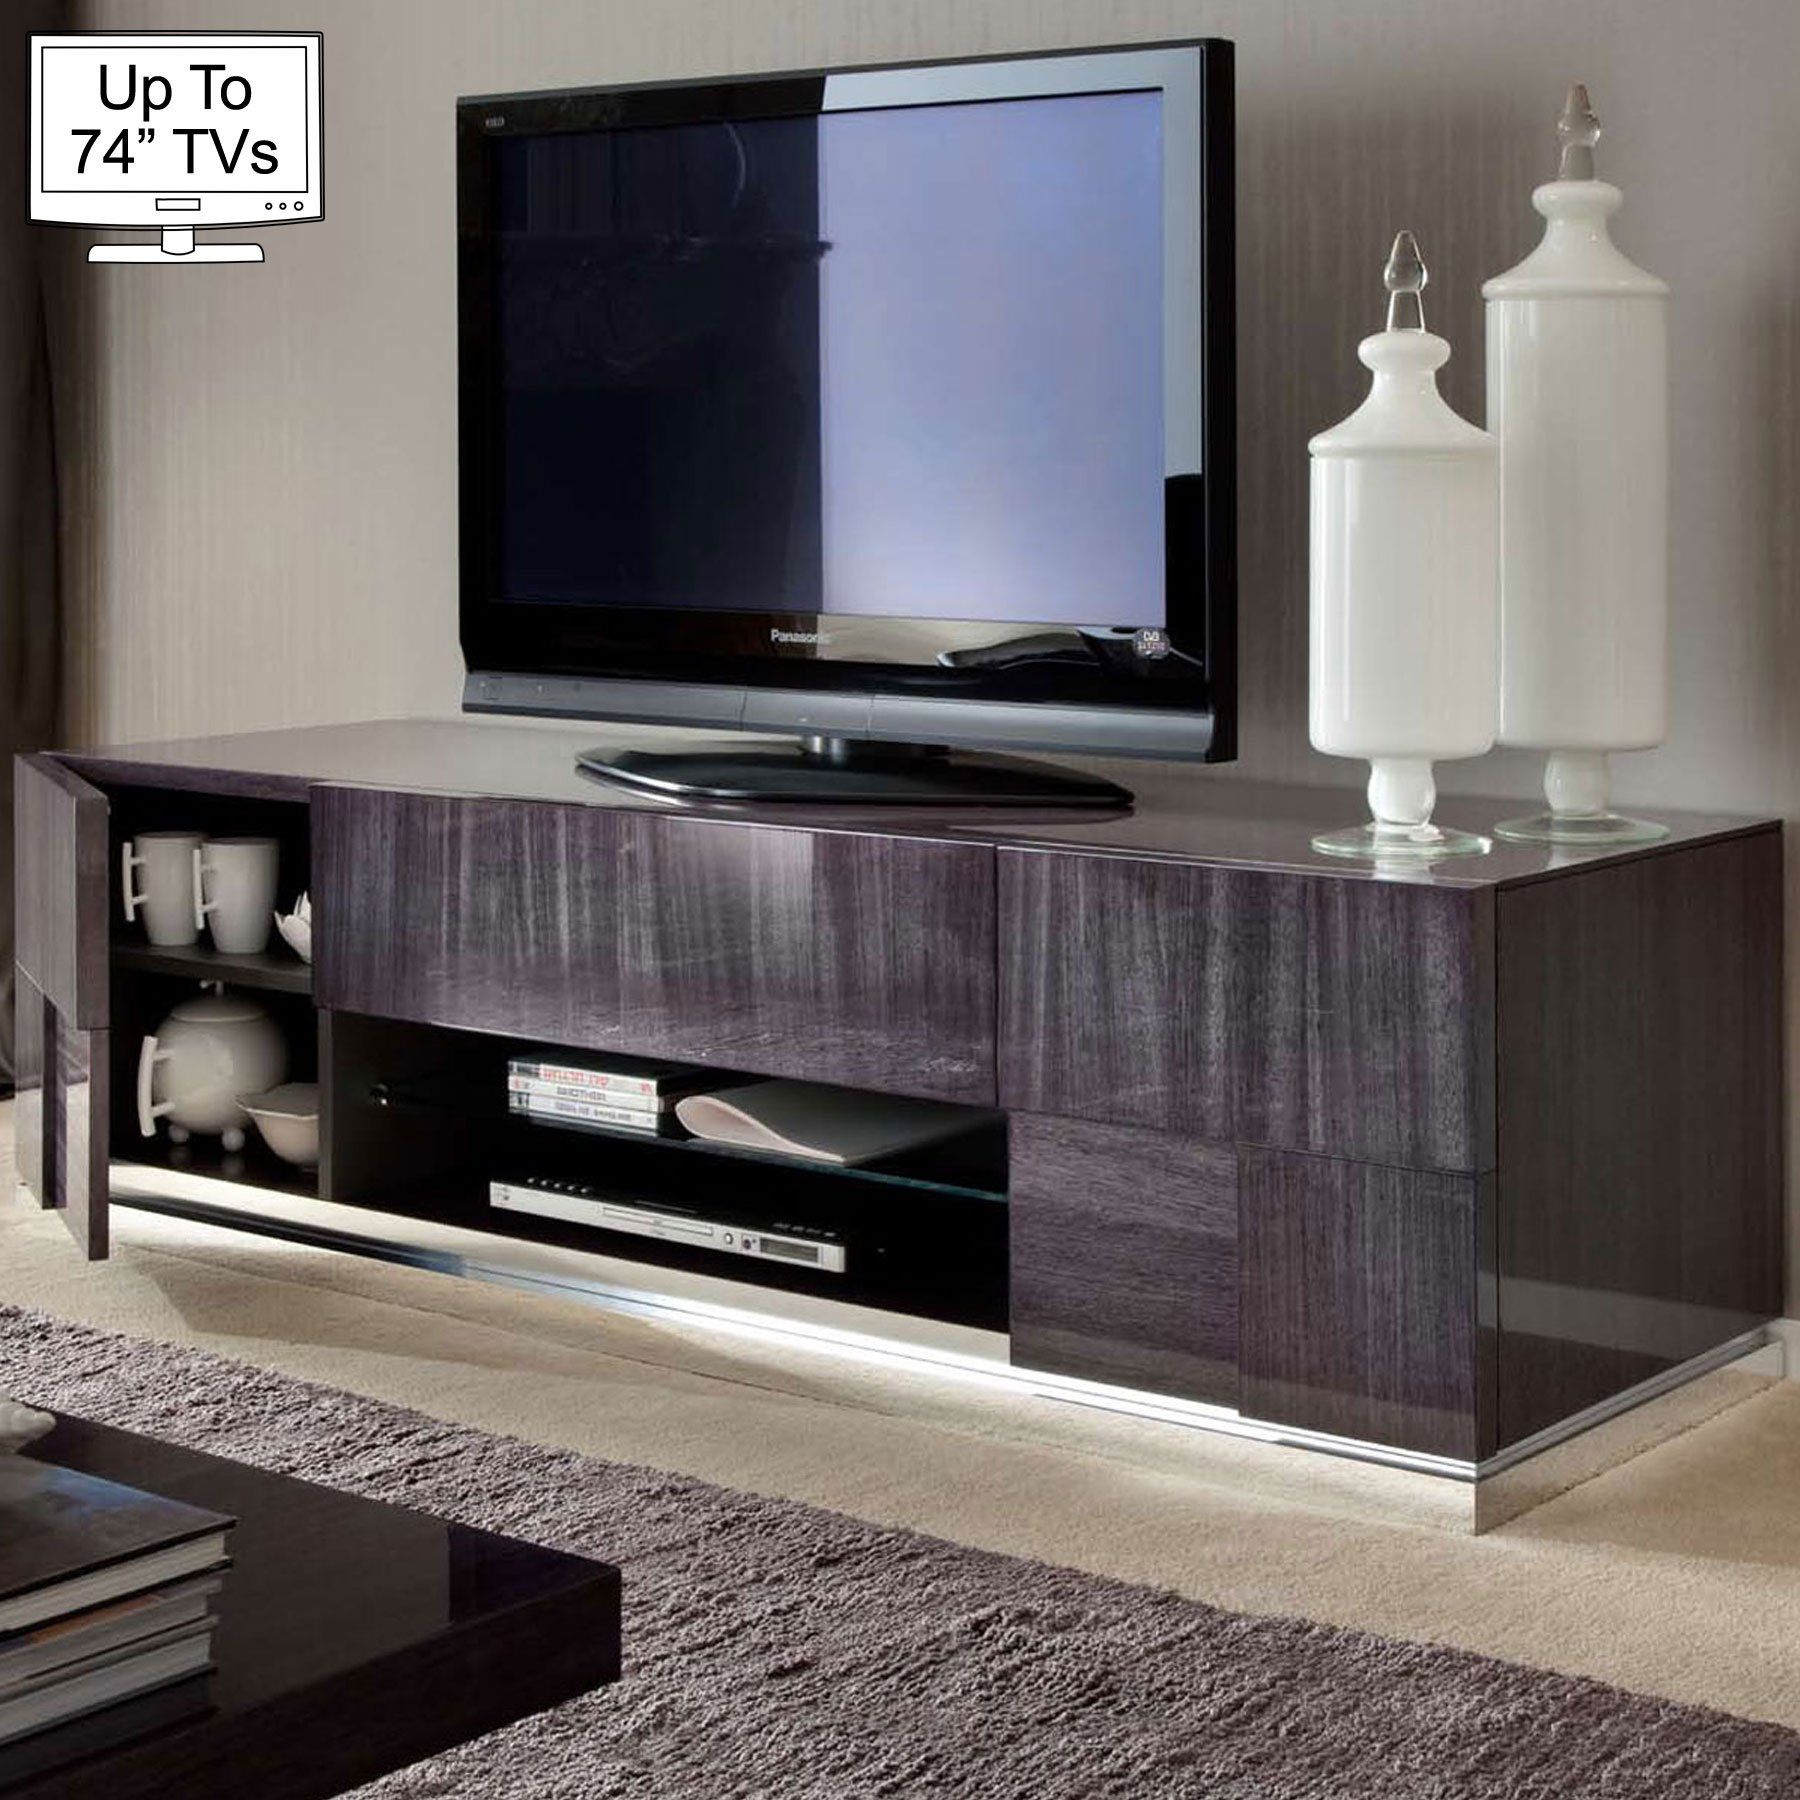 Monza High Gloss Tv Stand For Up To 74" Tvs Inside Cafe Tv Stands With Storage (Photo 12 of 15)